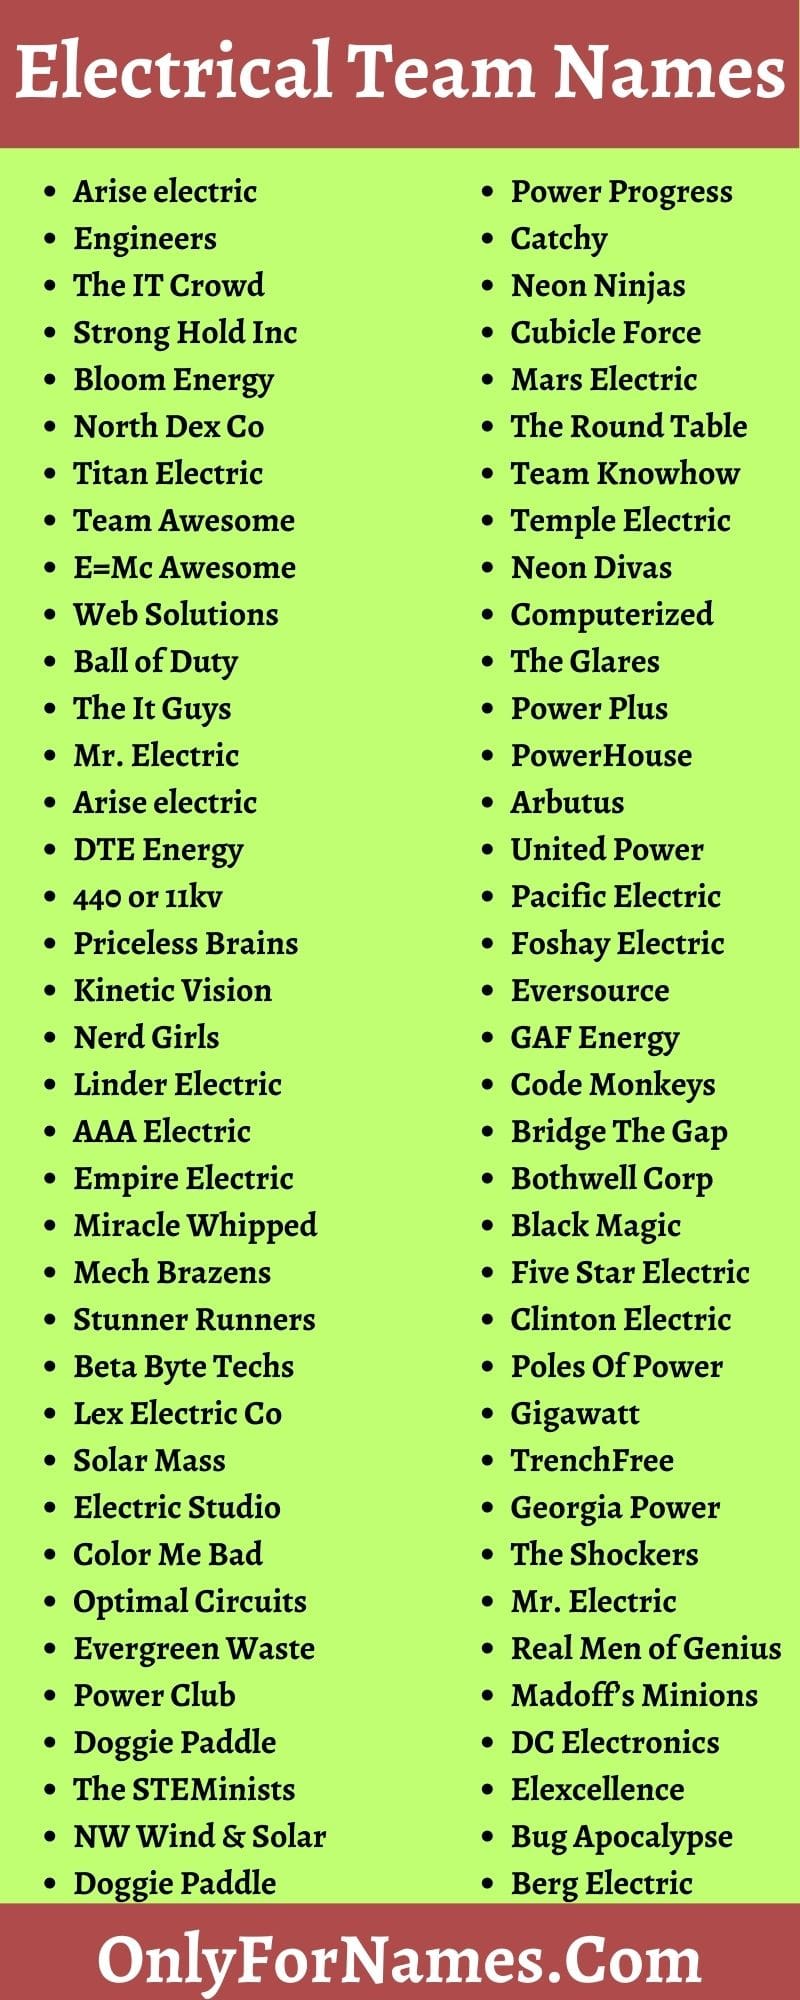 Electrical Team Names